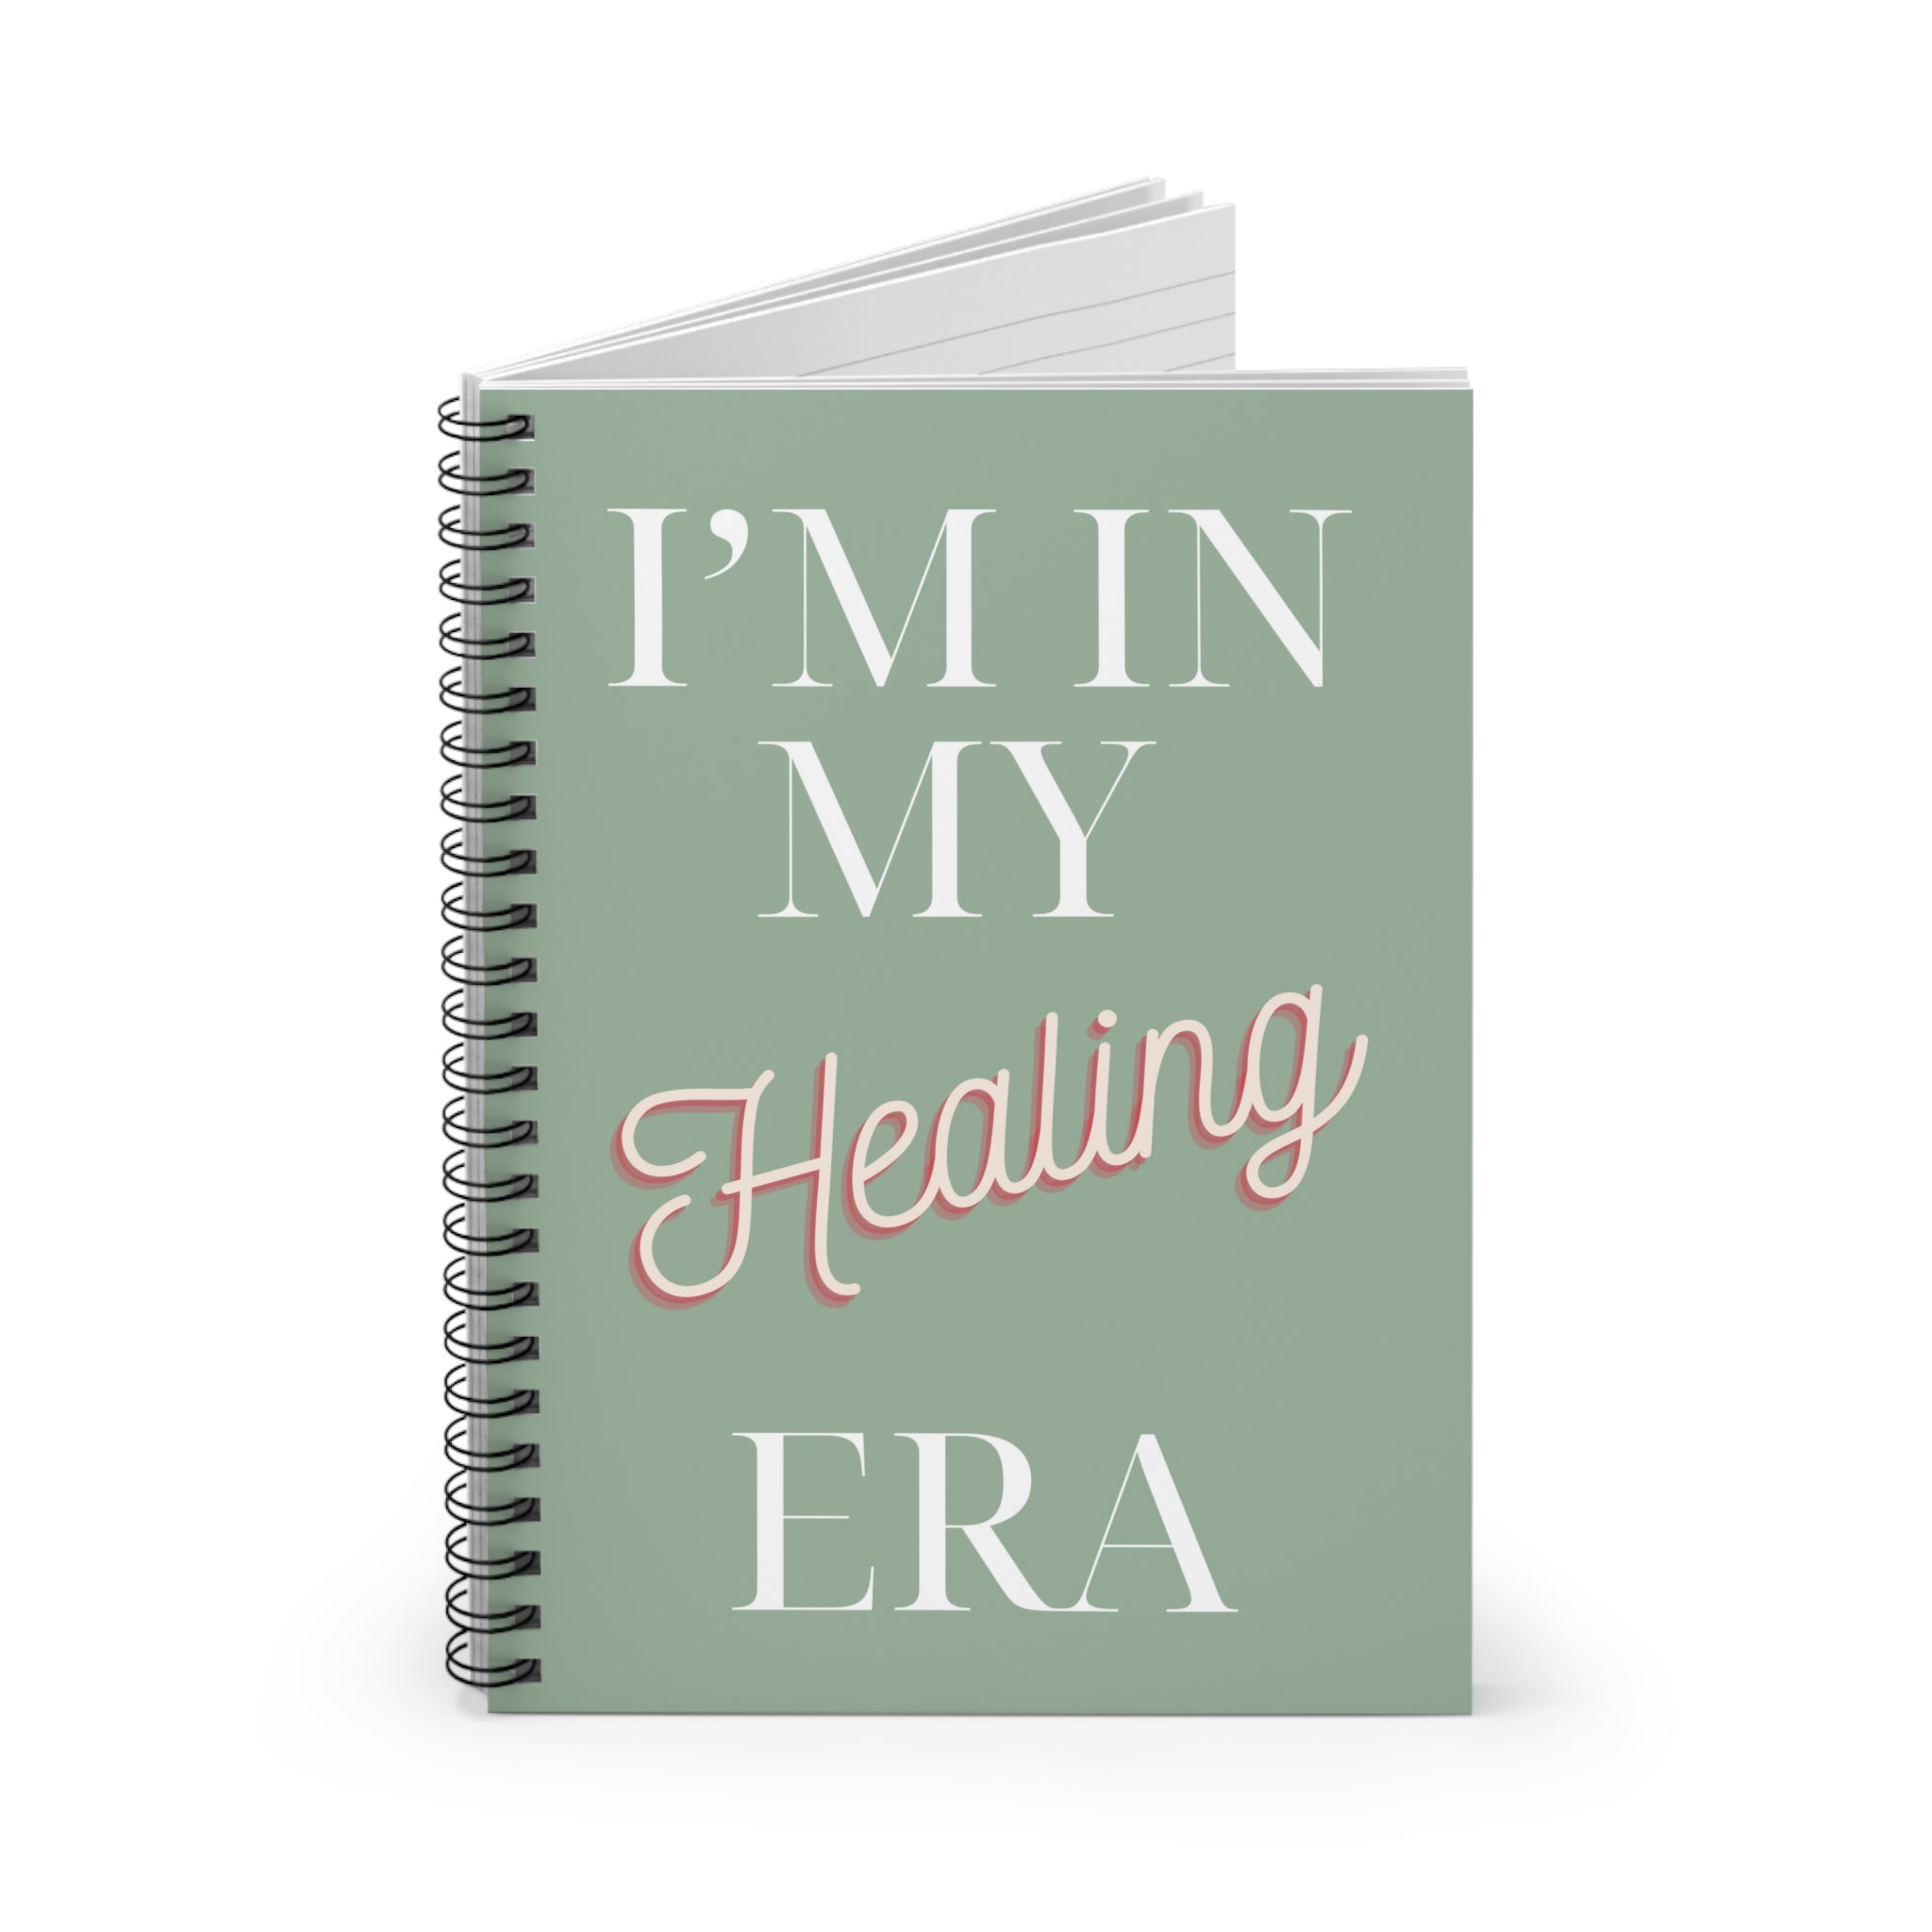 "I'm in my Healing Era" 6x8 Spiral Notebook - Ruled Line, 59 sheets